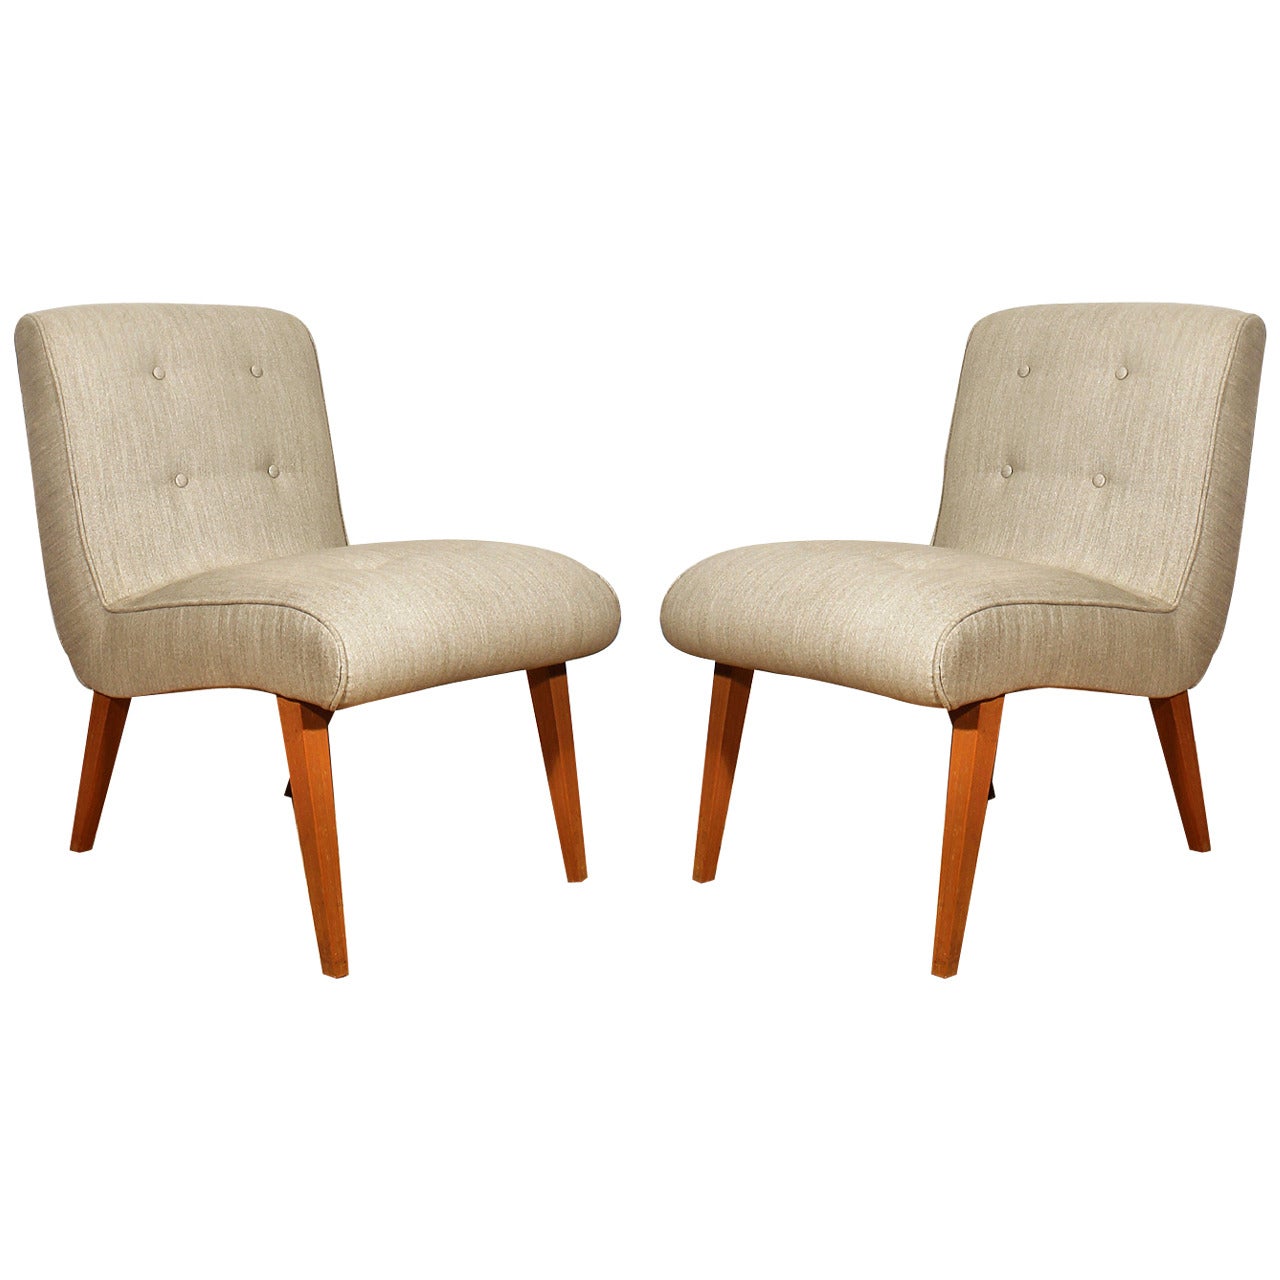 Pair of Mid-Century Modern Vostra Chairs by Walter Knoll - Germany For Sale